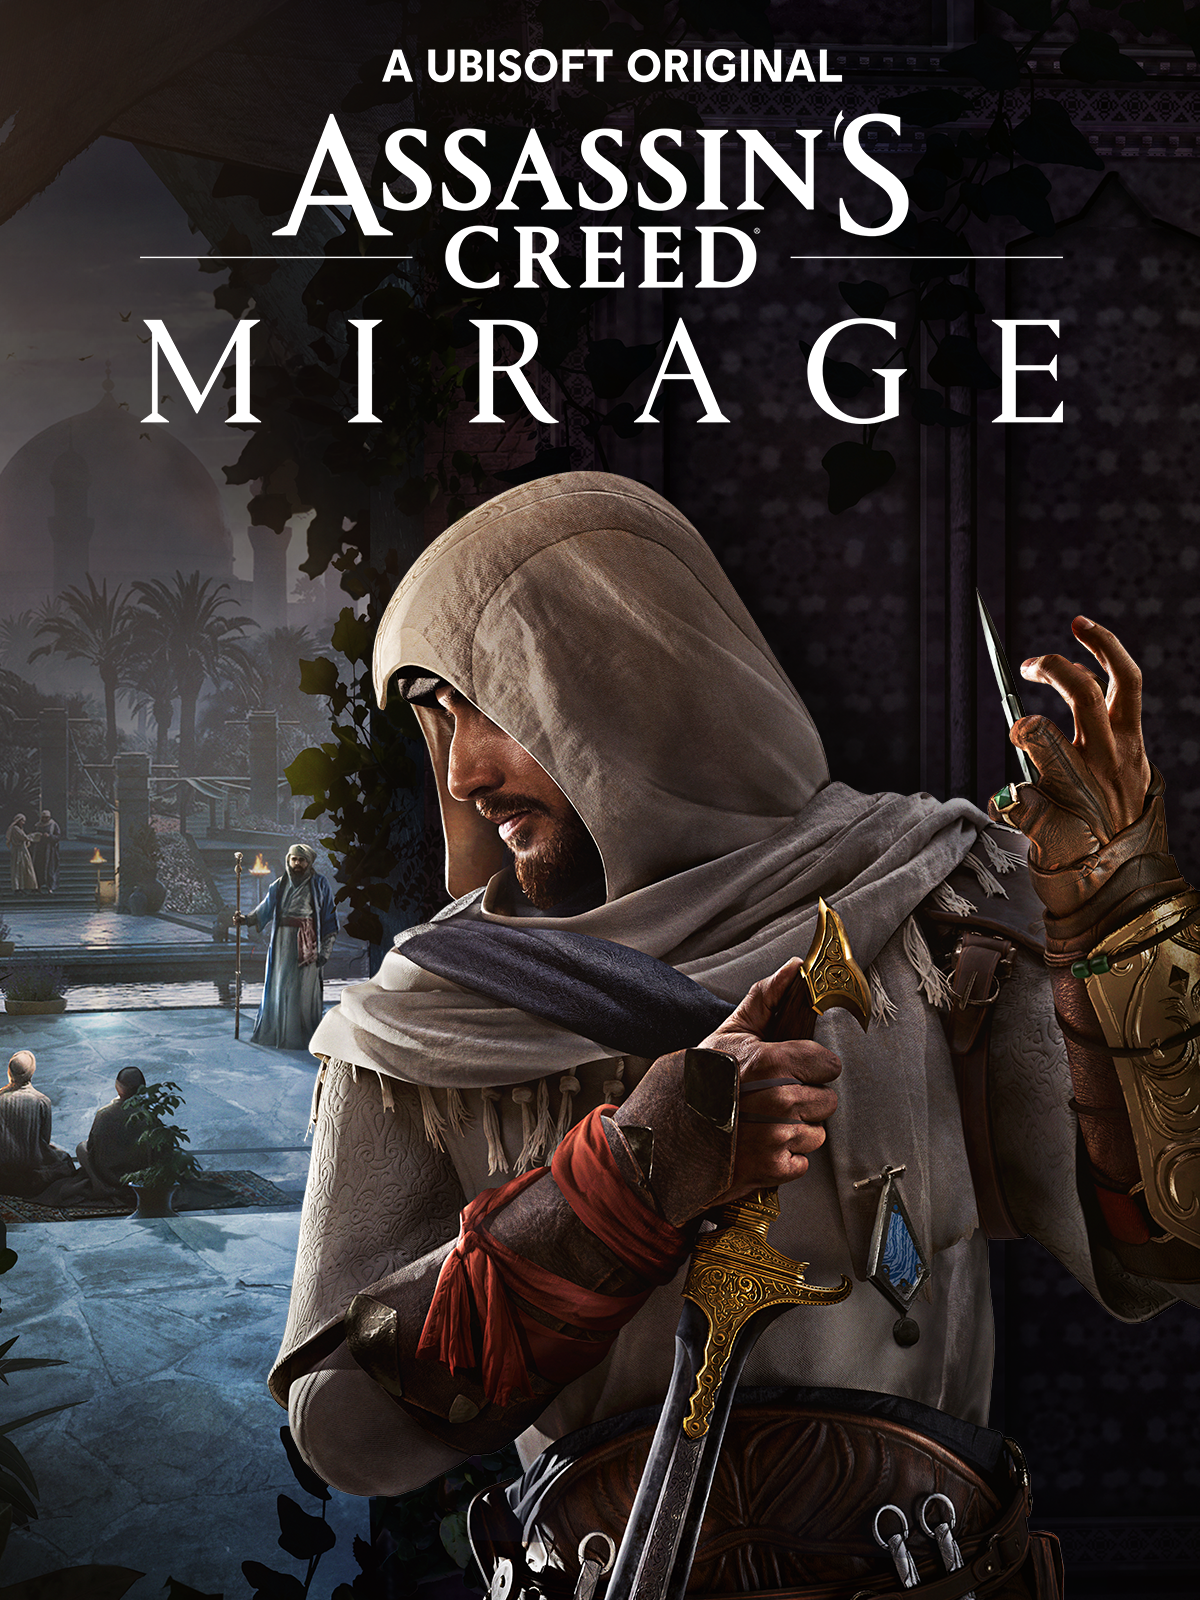 udvide protein rent Assassin's Creed: Mirage | Assassin's Creed Wiki | Fandom